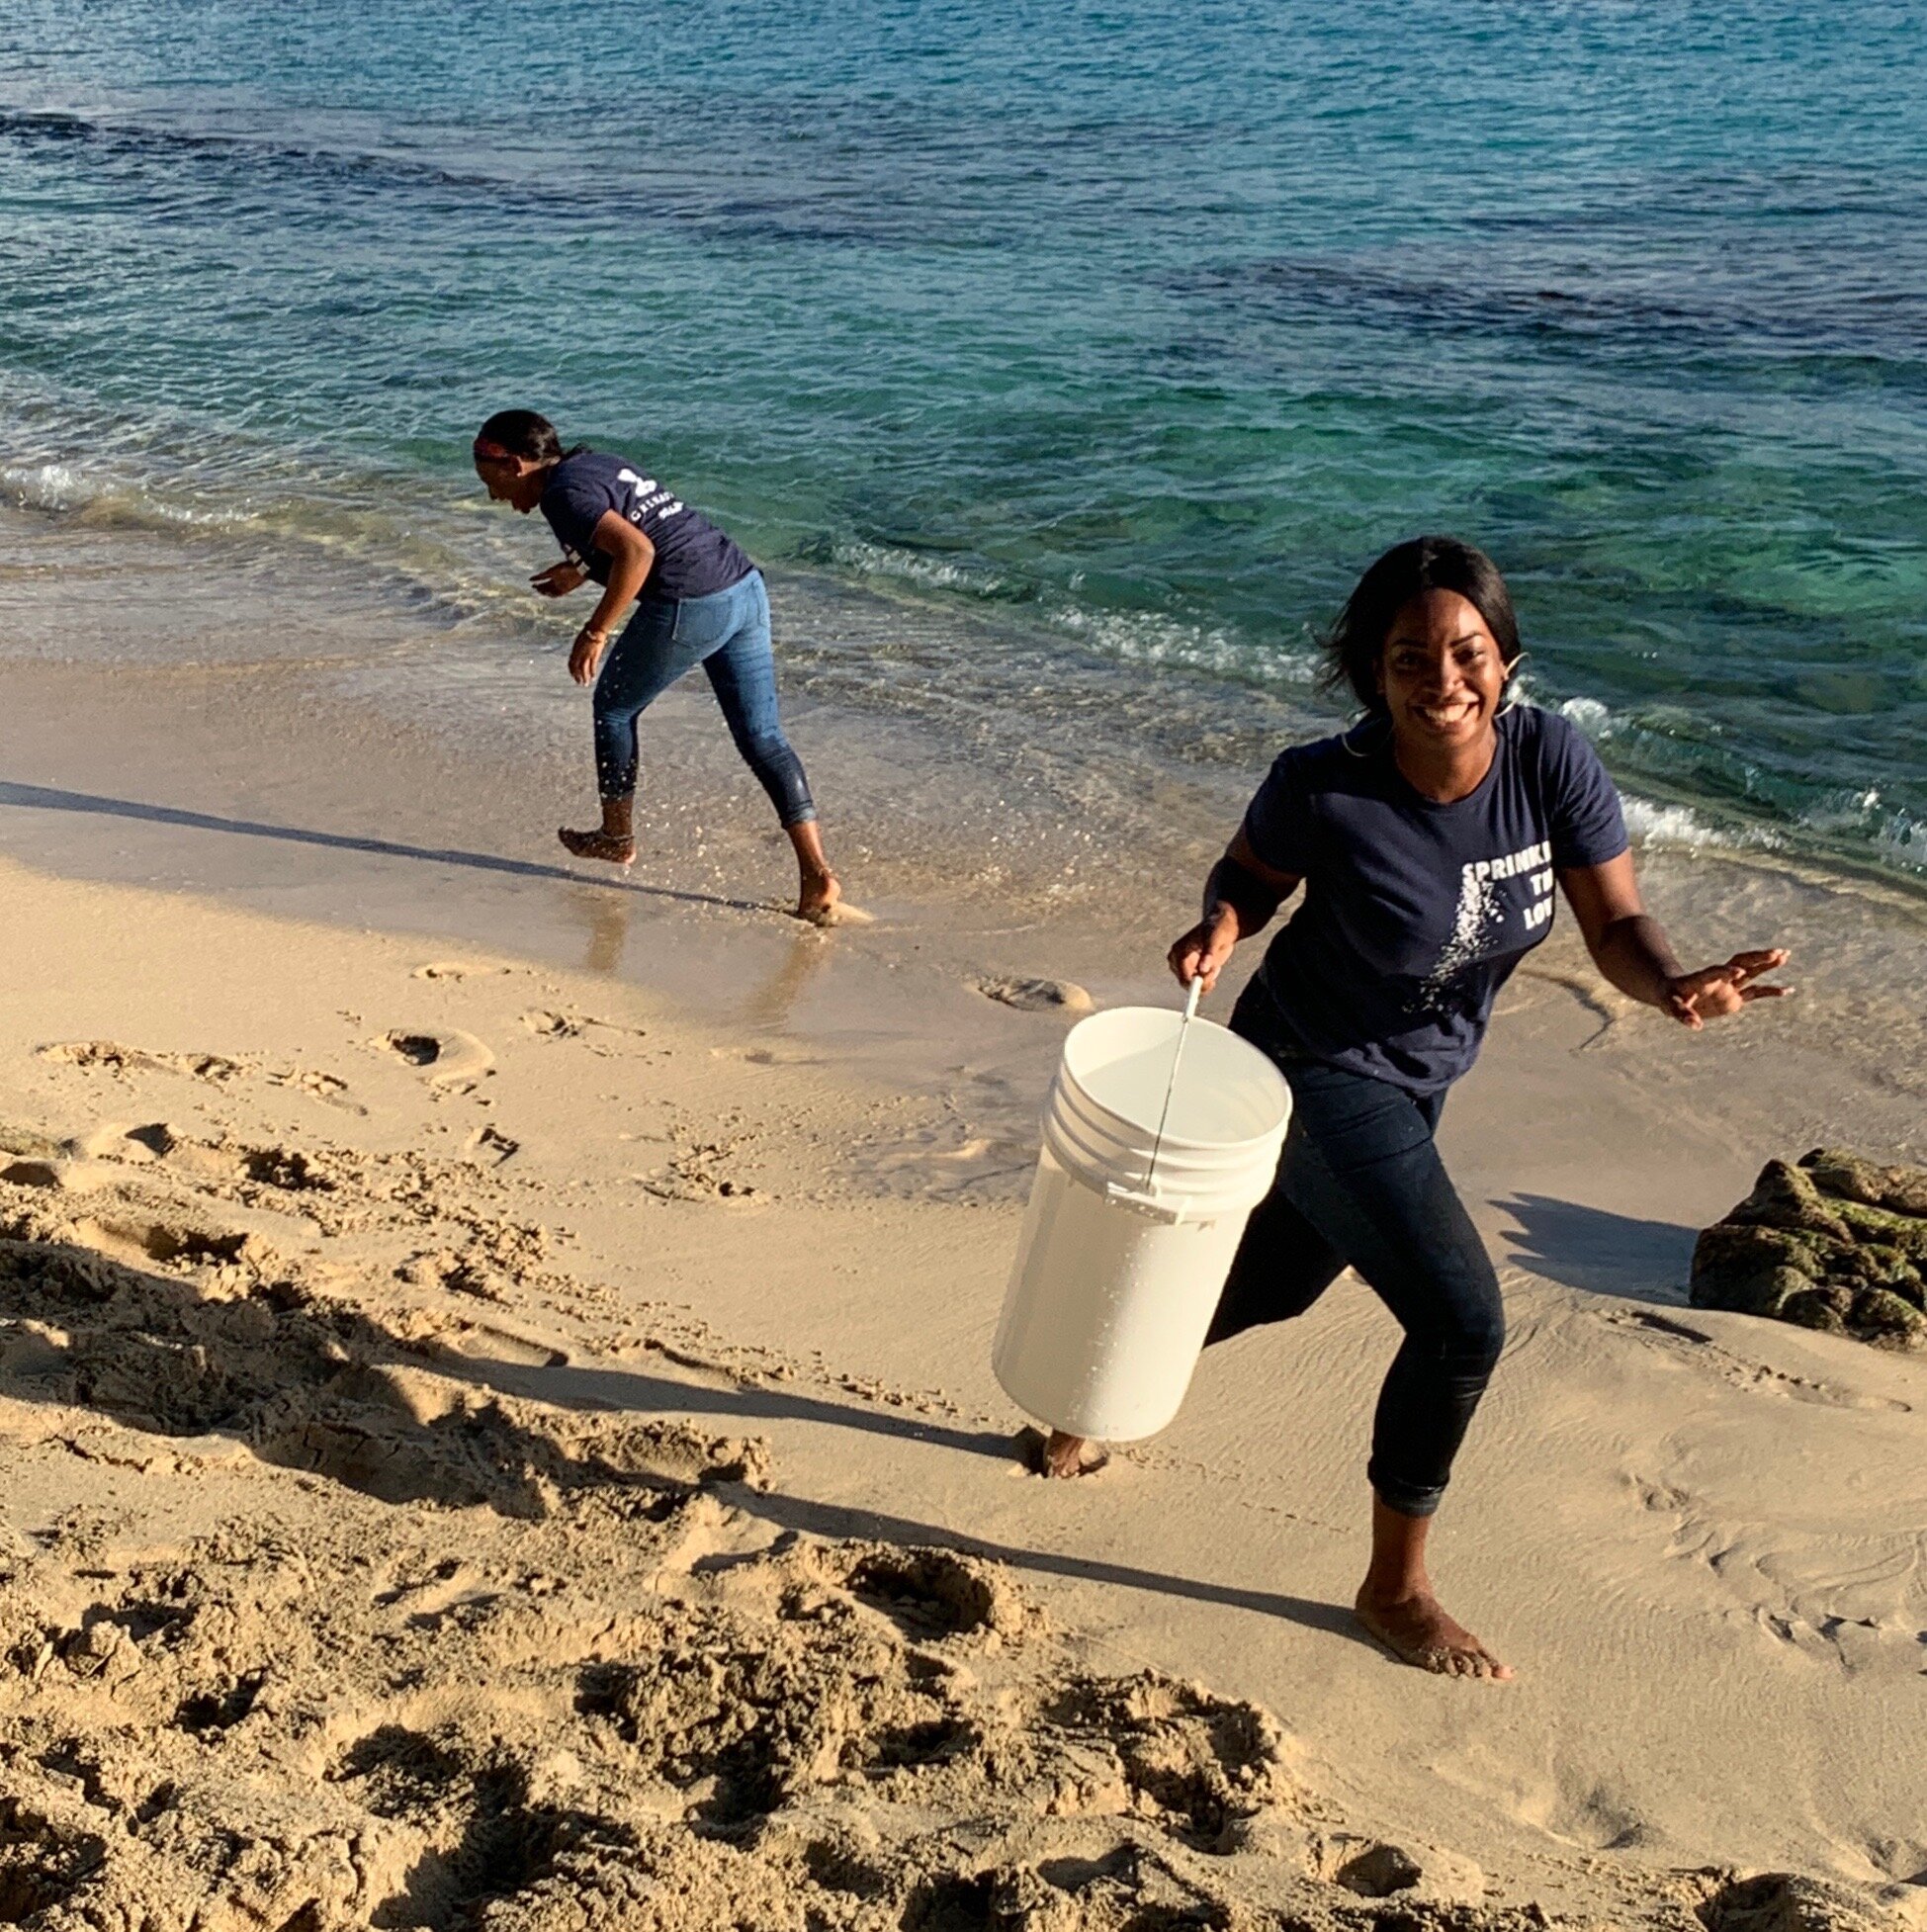 Staff happily collecting salt water at the beach